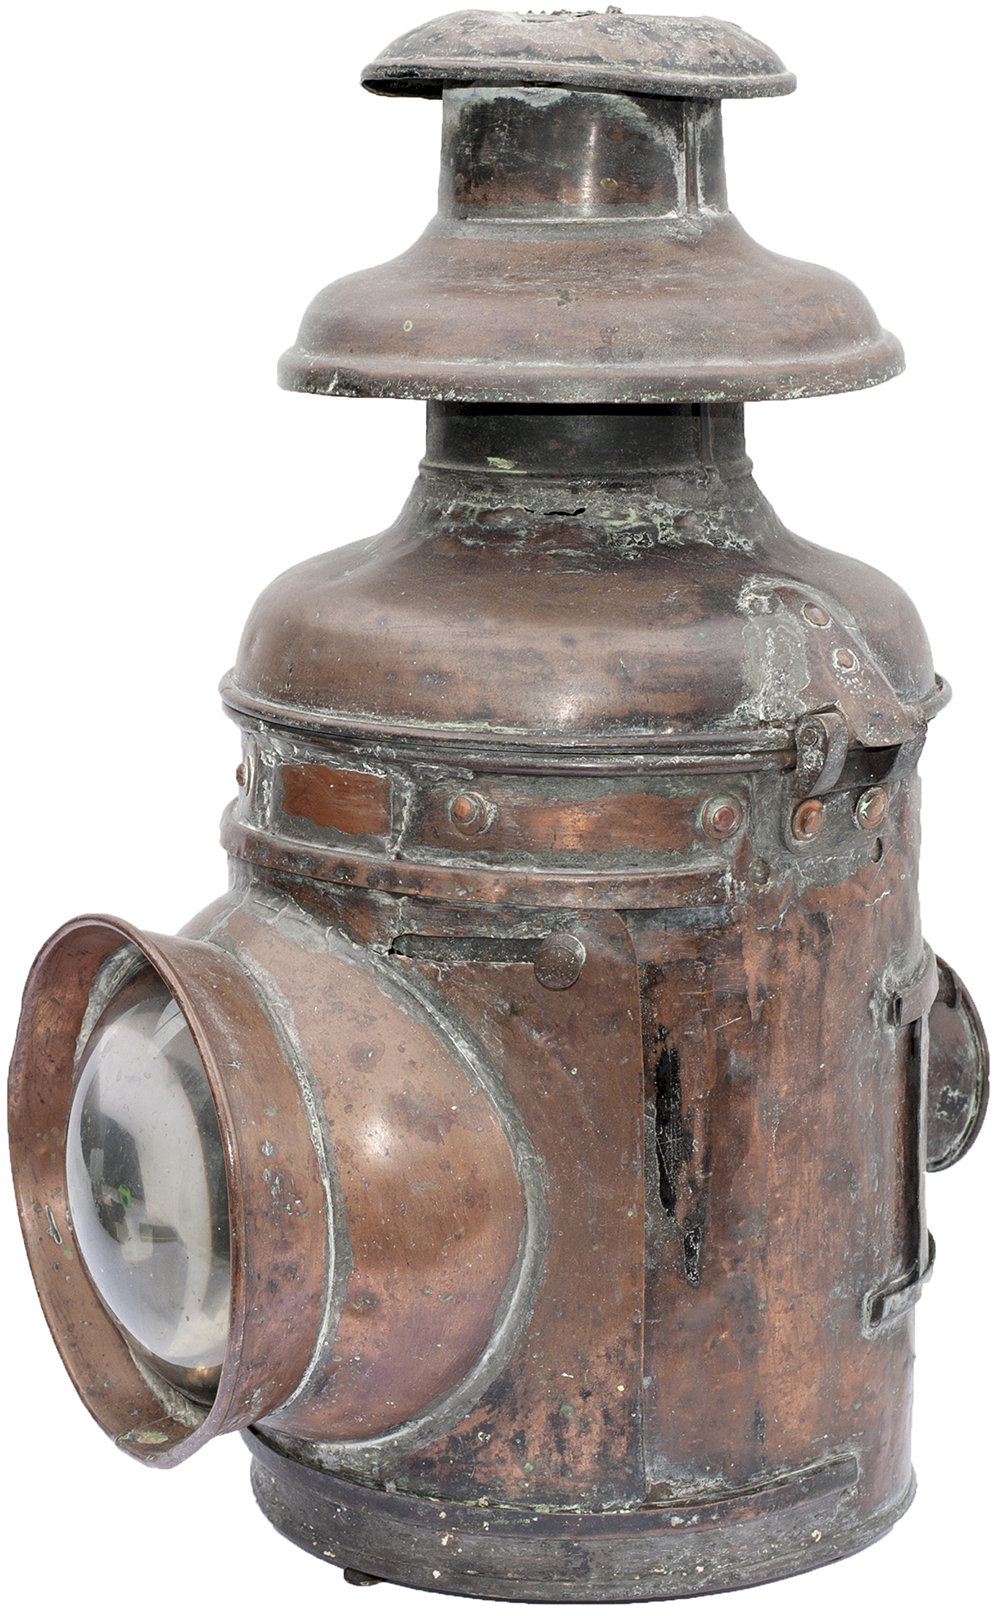 19th century copper signal lamp with large bullseye lens and double mushroom top, later reservoir